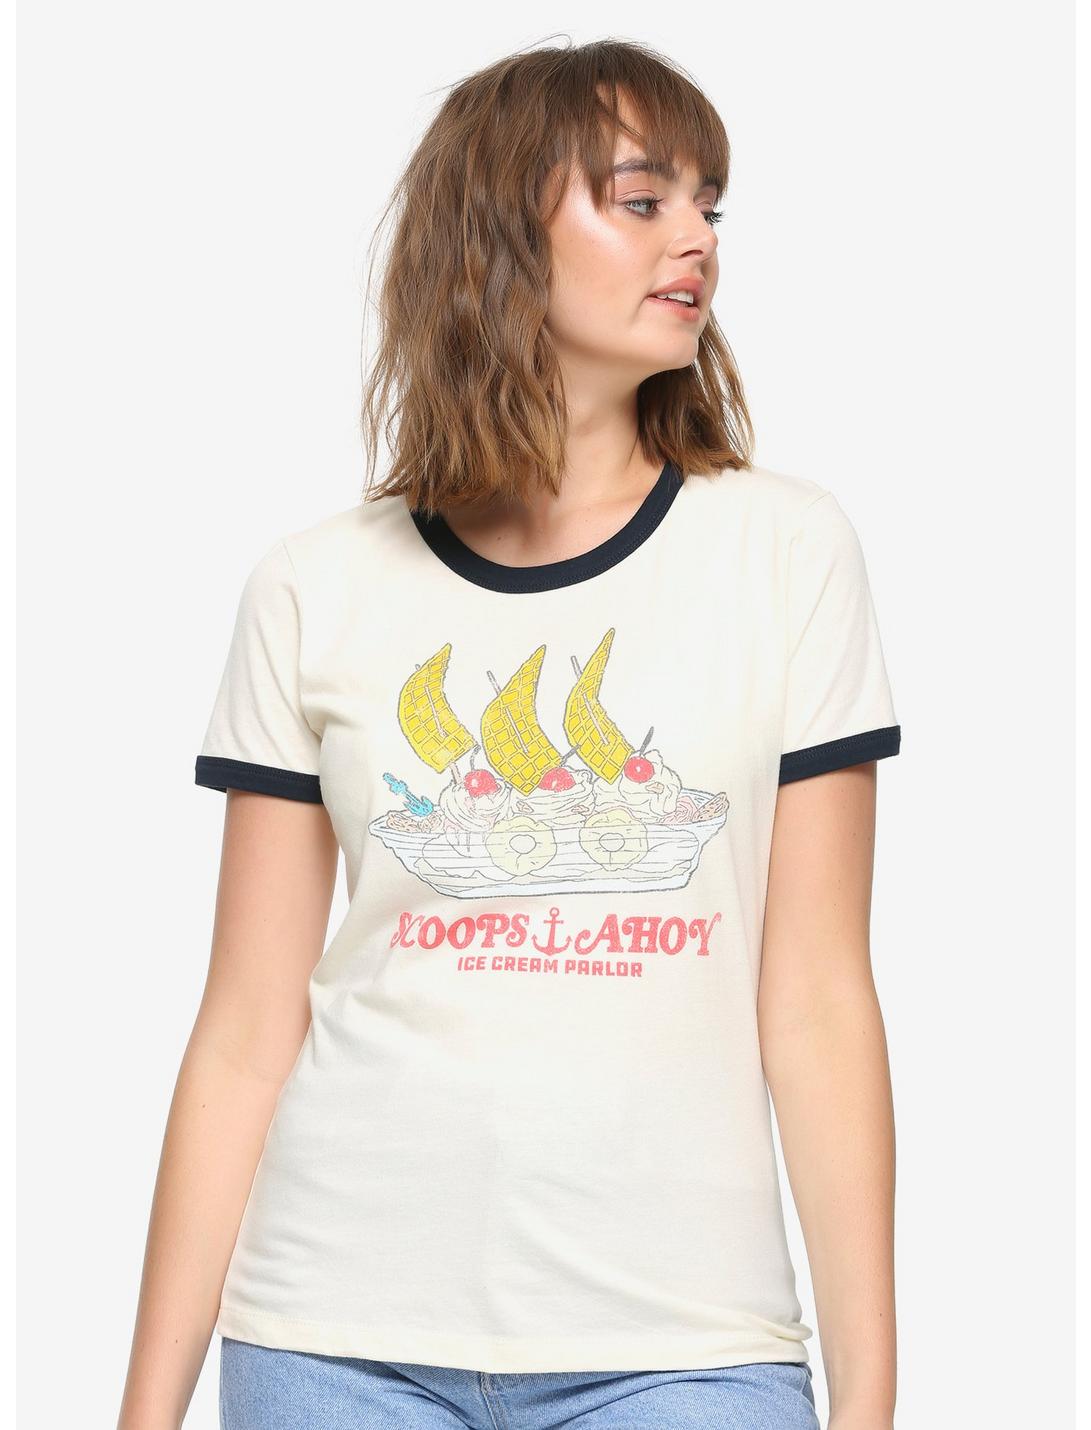 Stranger Things Scoops Ahoy Women's Ringer T-Shirt - BoxLunch Exclusive, NATURAL, hi-res